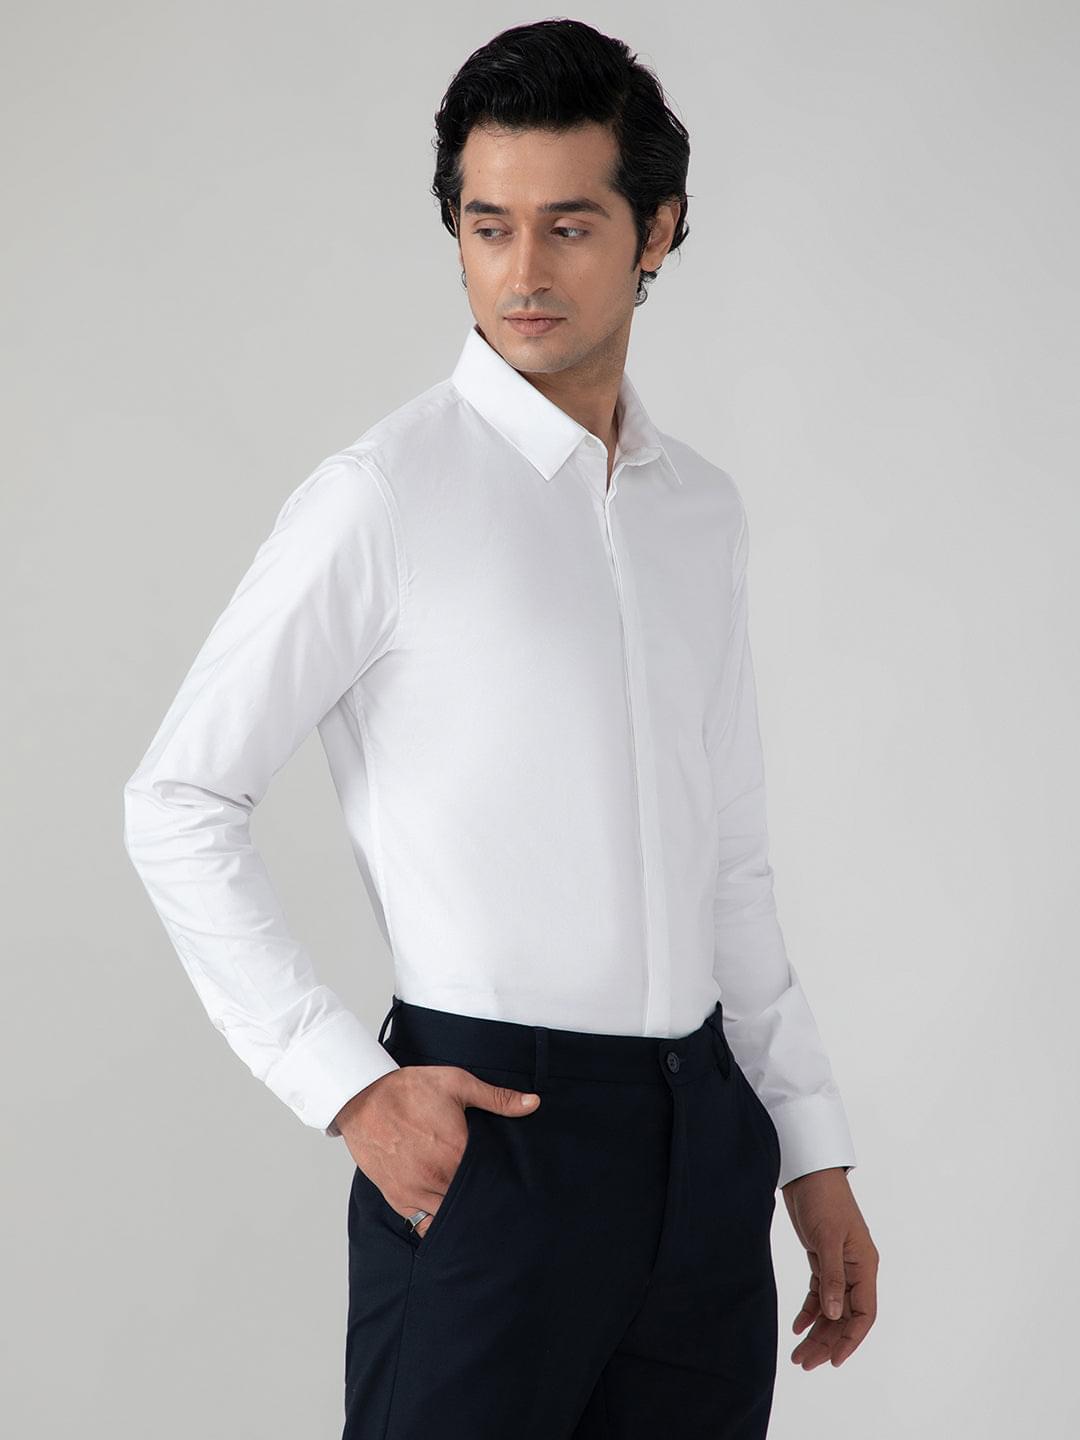 Satin Evening Shirt in White with Stretch - Slim Fit